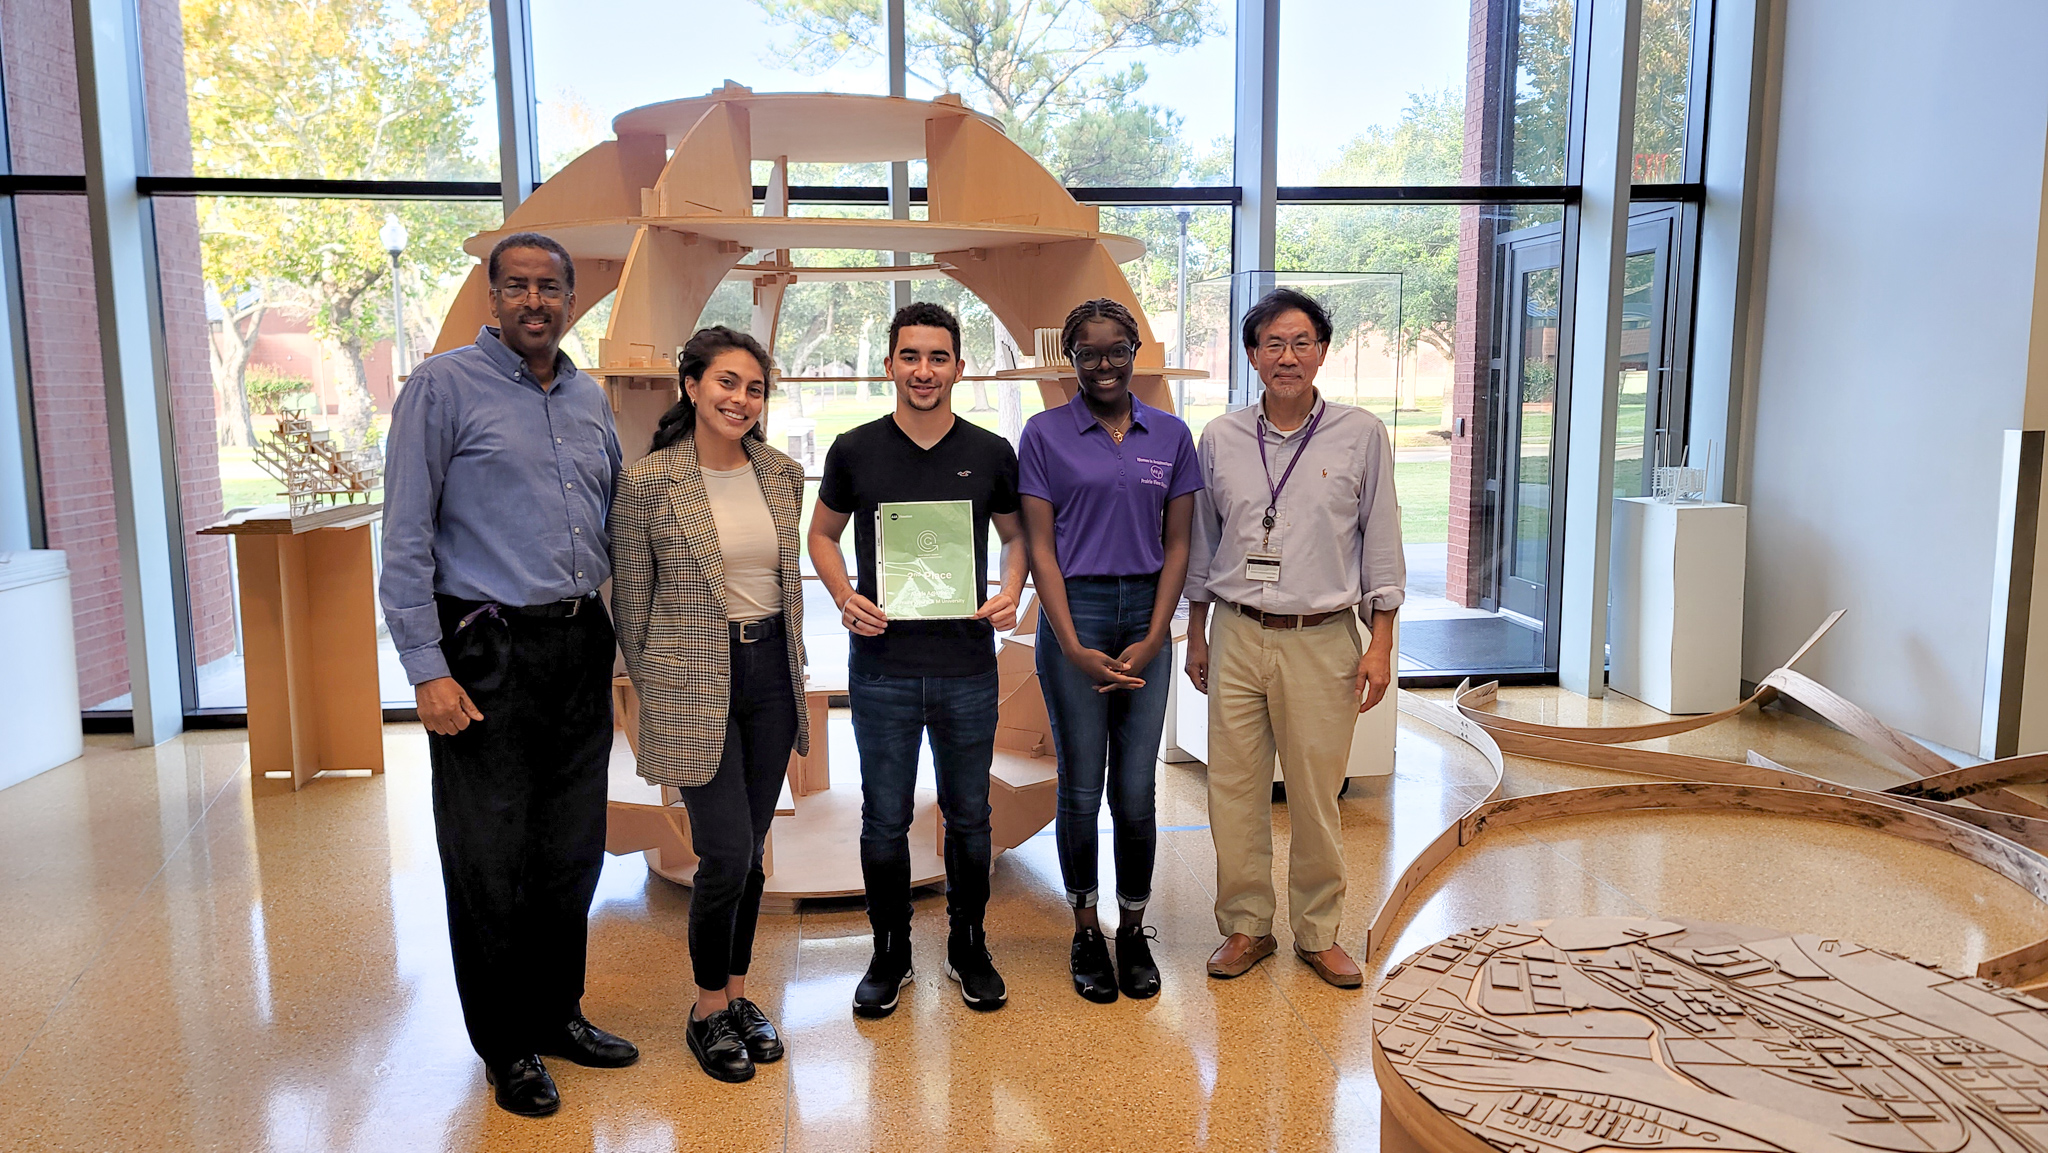 PVAMU students place second in statewide architectural design competition